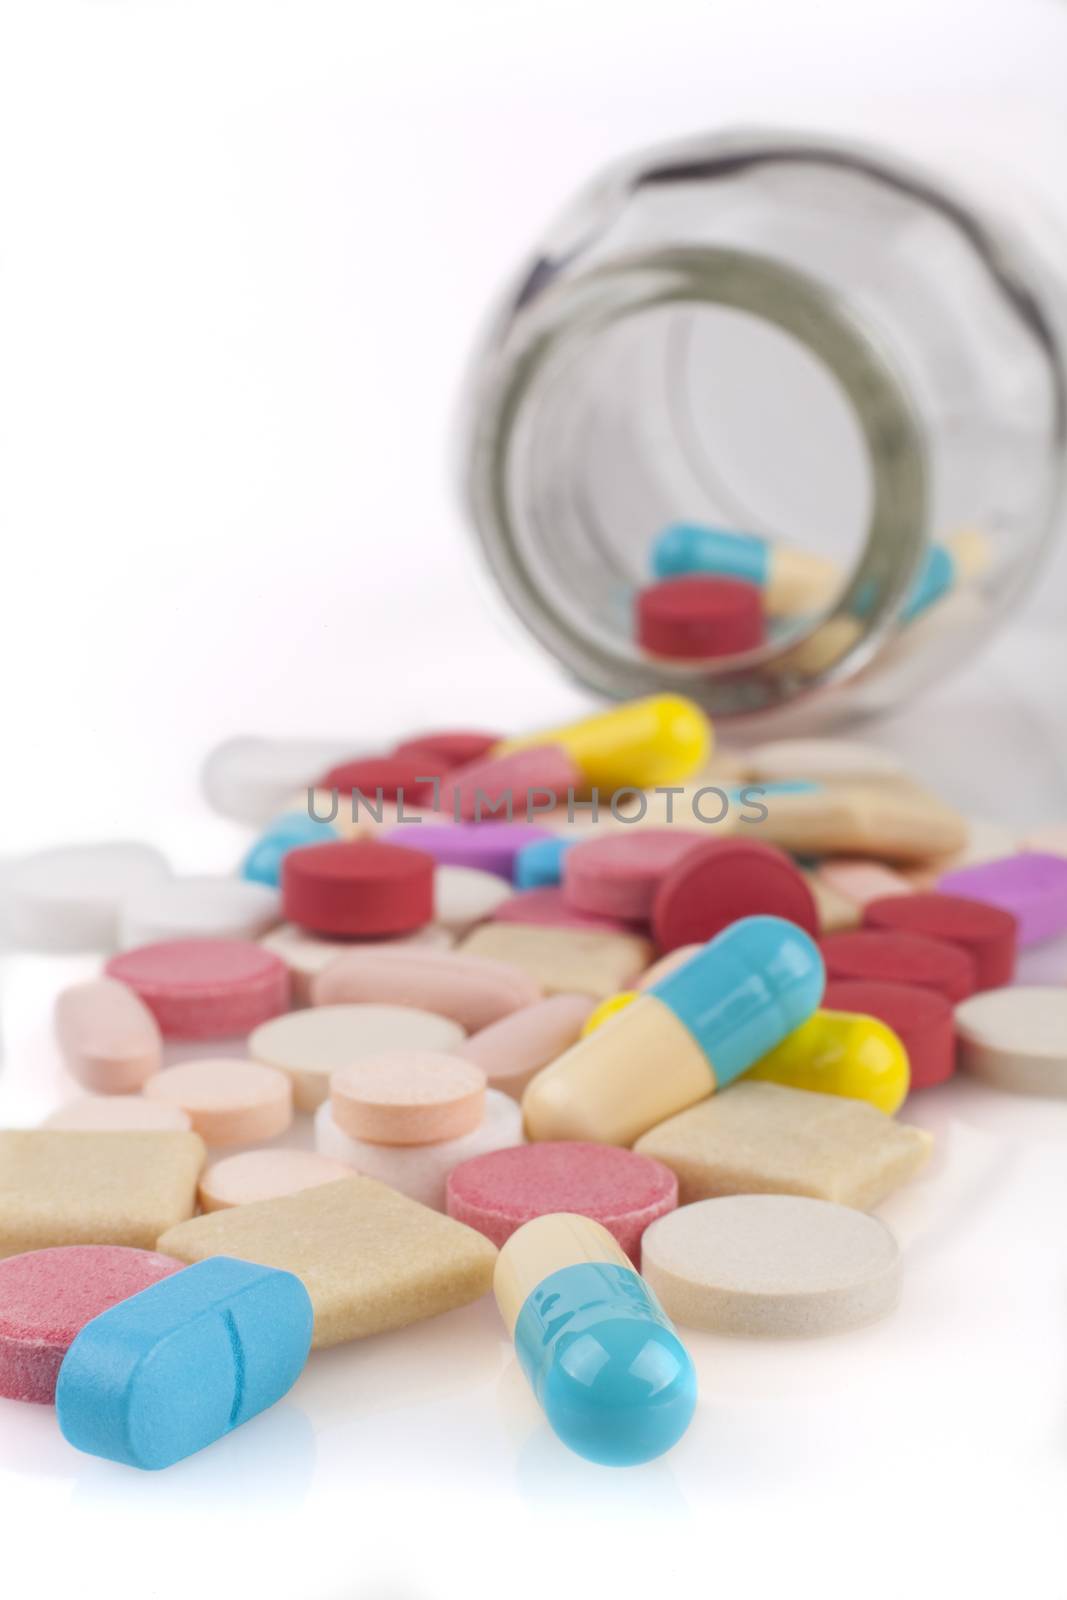 Spilled Pills by orcearo